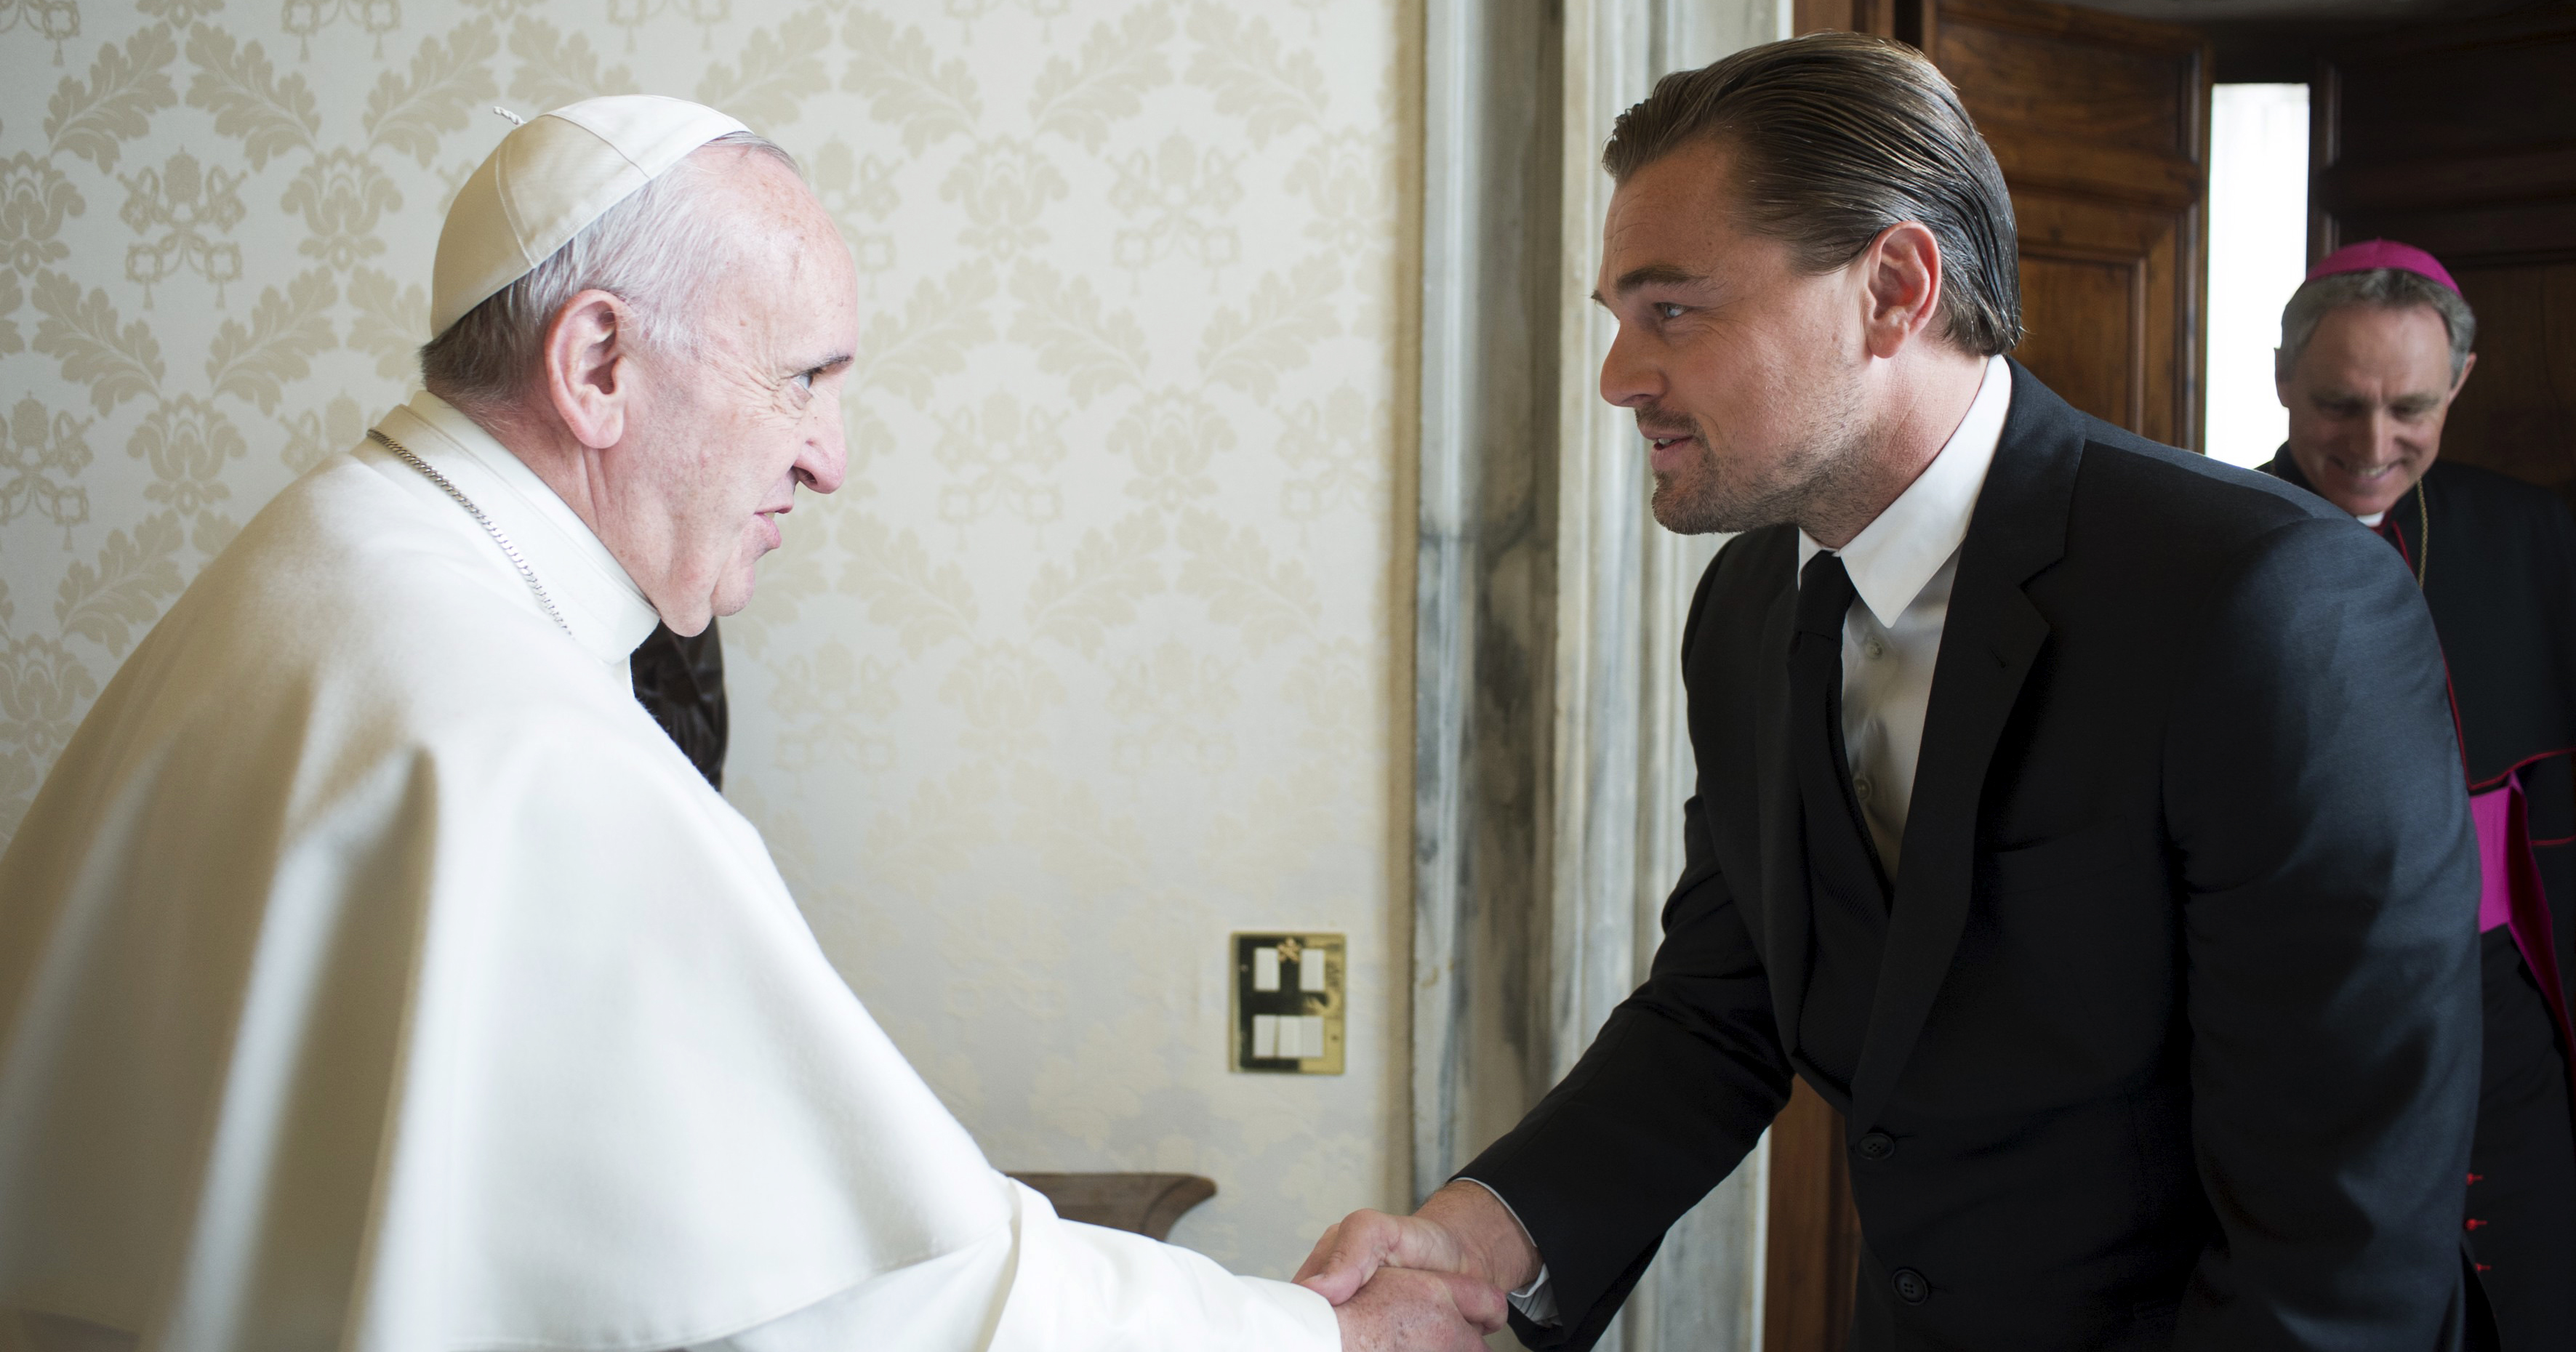 Pope Francis shakes hands with Leonardo DiCaprio at the Vatican on Jan. 28, 2016.